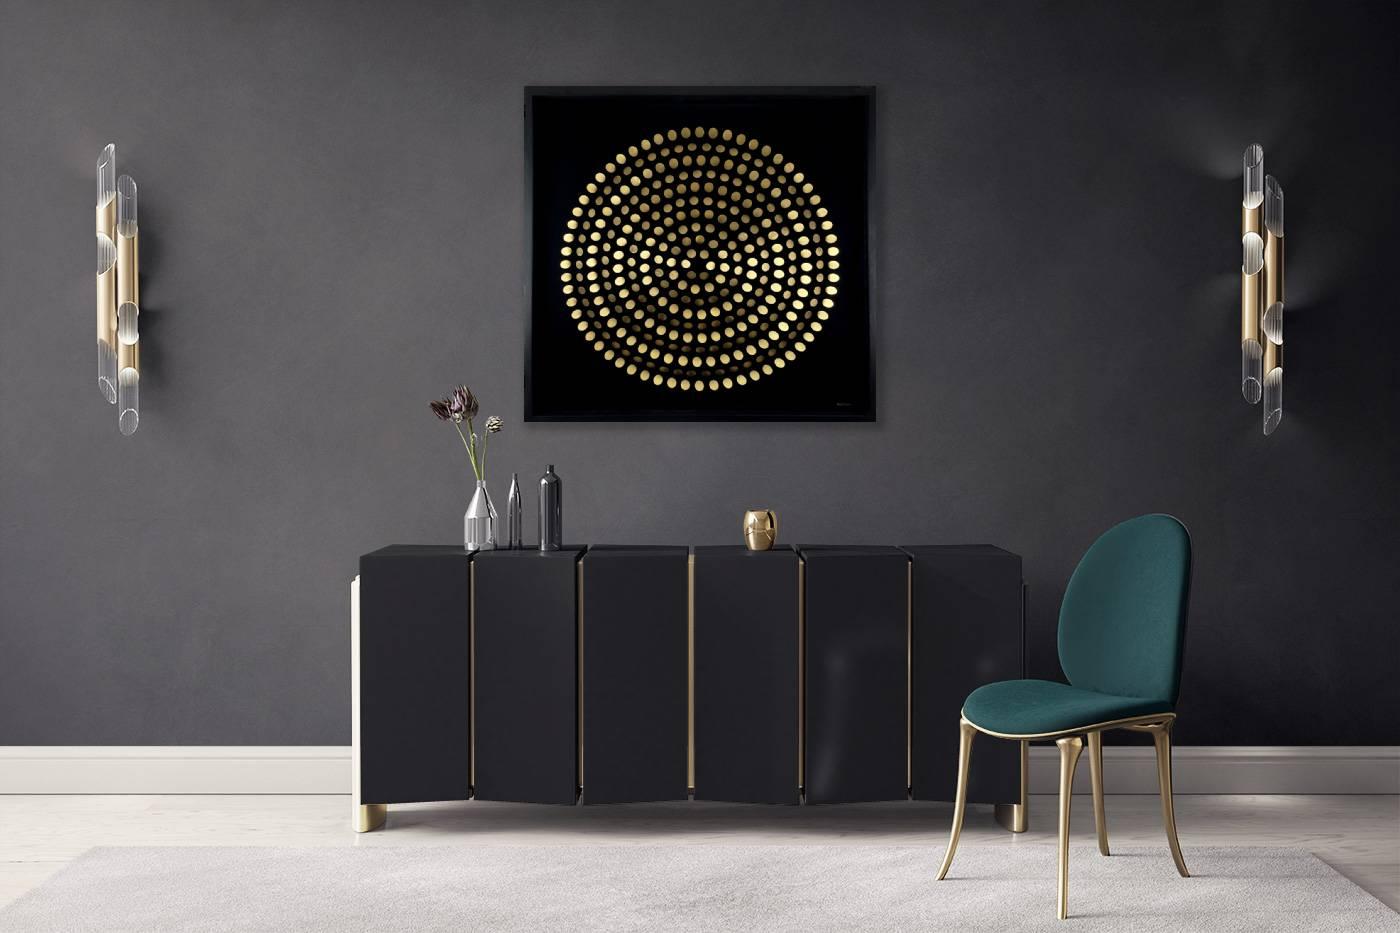 Golden Rotations
Mixed Media
39 3/8 x 39 3/8 in
100 x 100 cm

This artwork by Peter Monaghan is an example of his rich talent in creating dynamic multimedia artworks which speak to his rich history in graphic design. The Golden Rotations is a